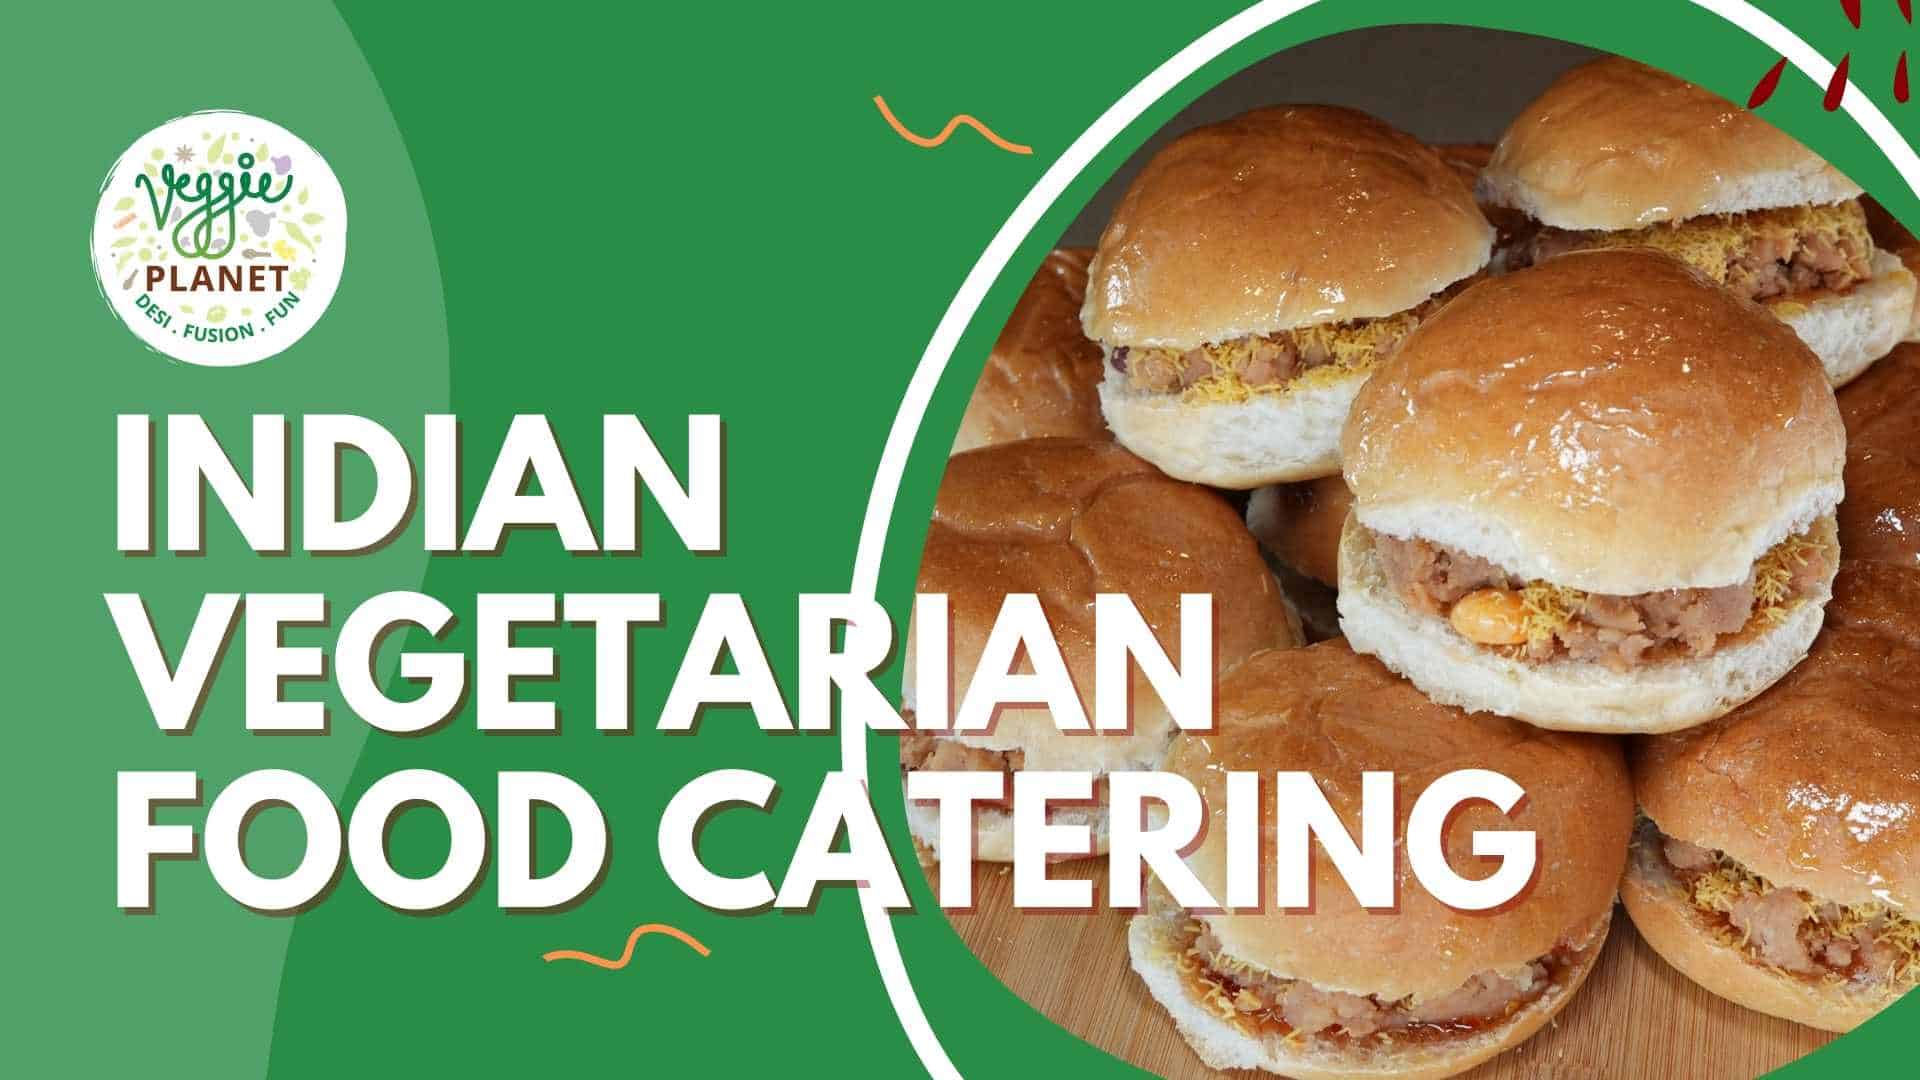 Why Choose Indian Vegetarian Food Catering?